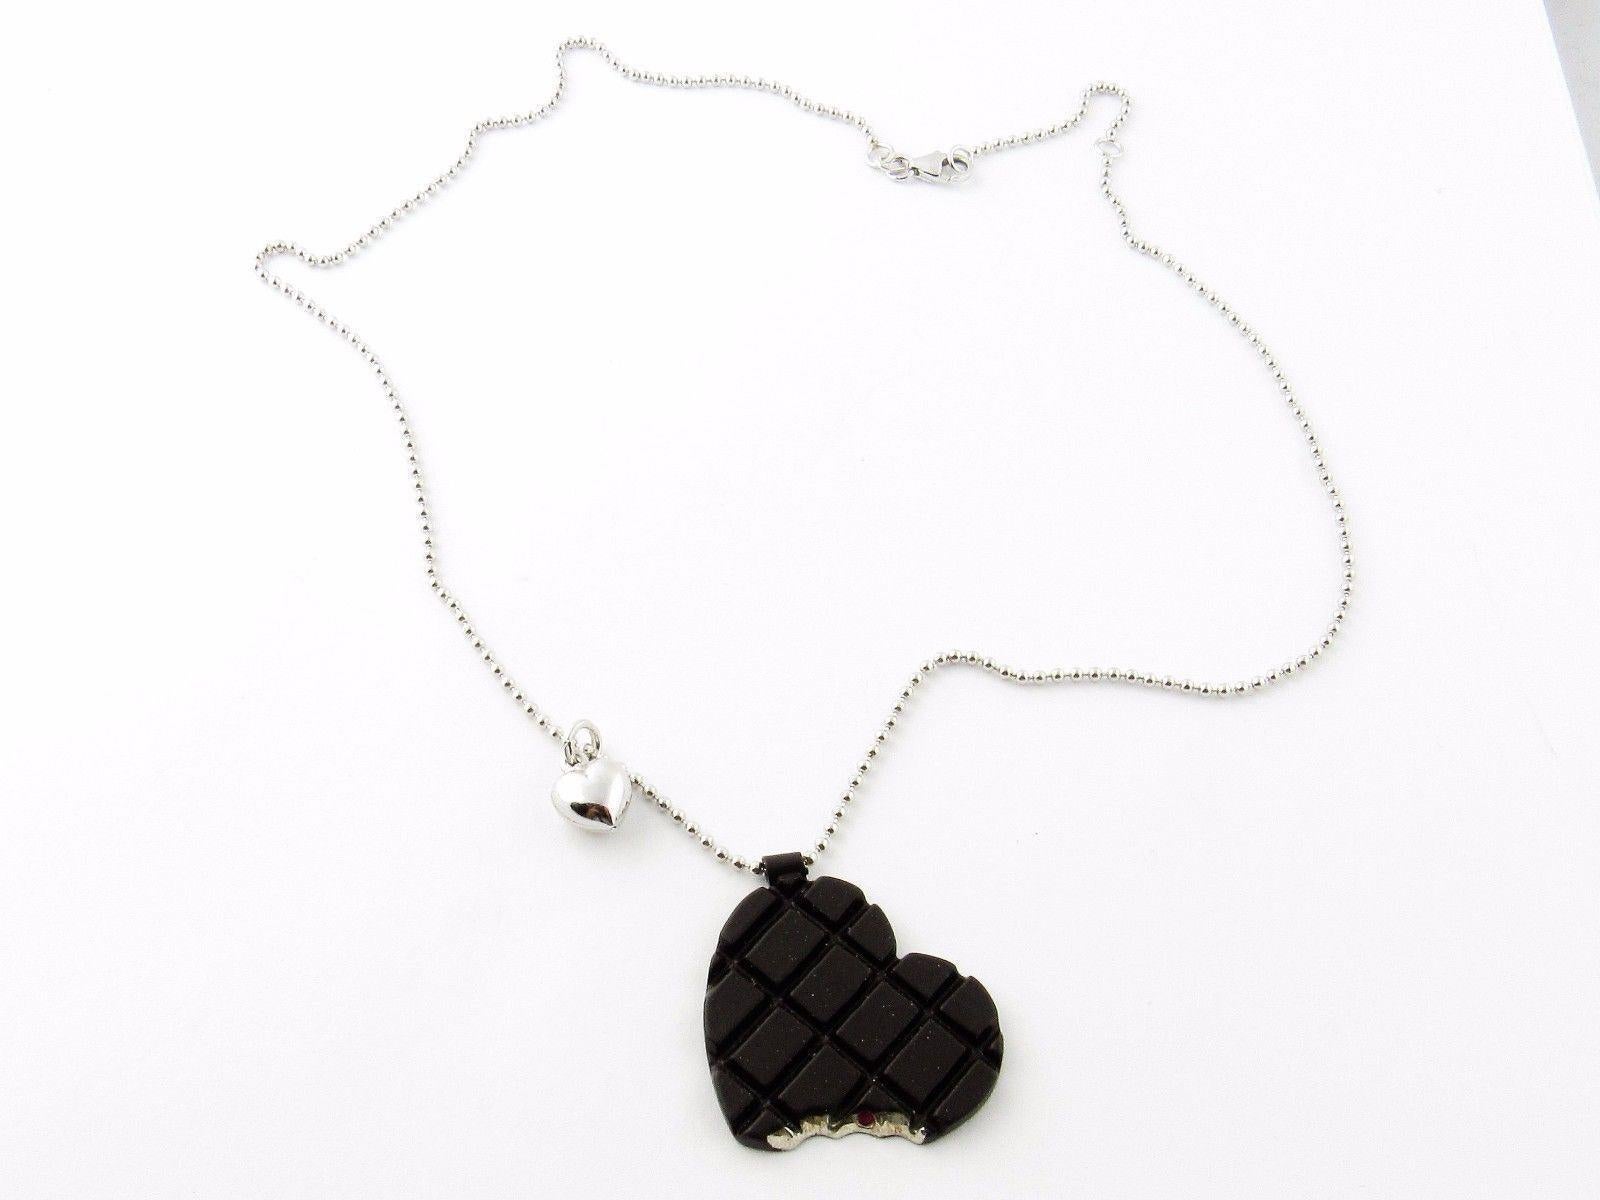 Roberto Coin Sterling Silver Chocolate Heart With Bite Necklace

This necklace is authentic Roberto Coin 

The chocolate rubber cookie heart has the signature RC ruby in the bite and is marked Roberto Coin on back.

Sterling necklace is marked 925